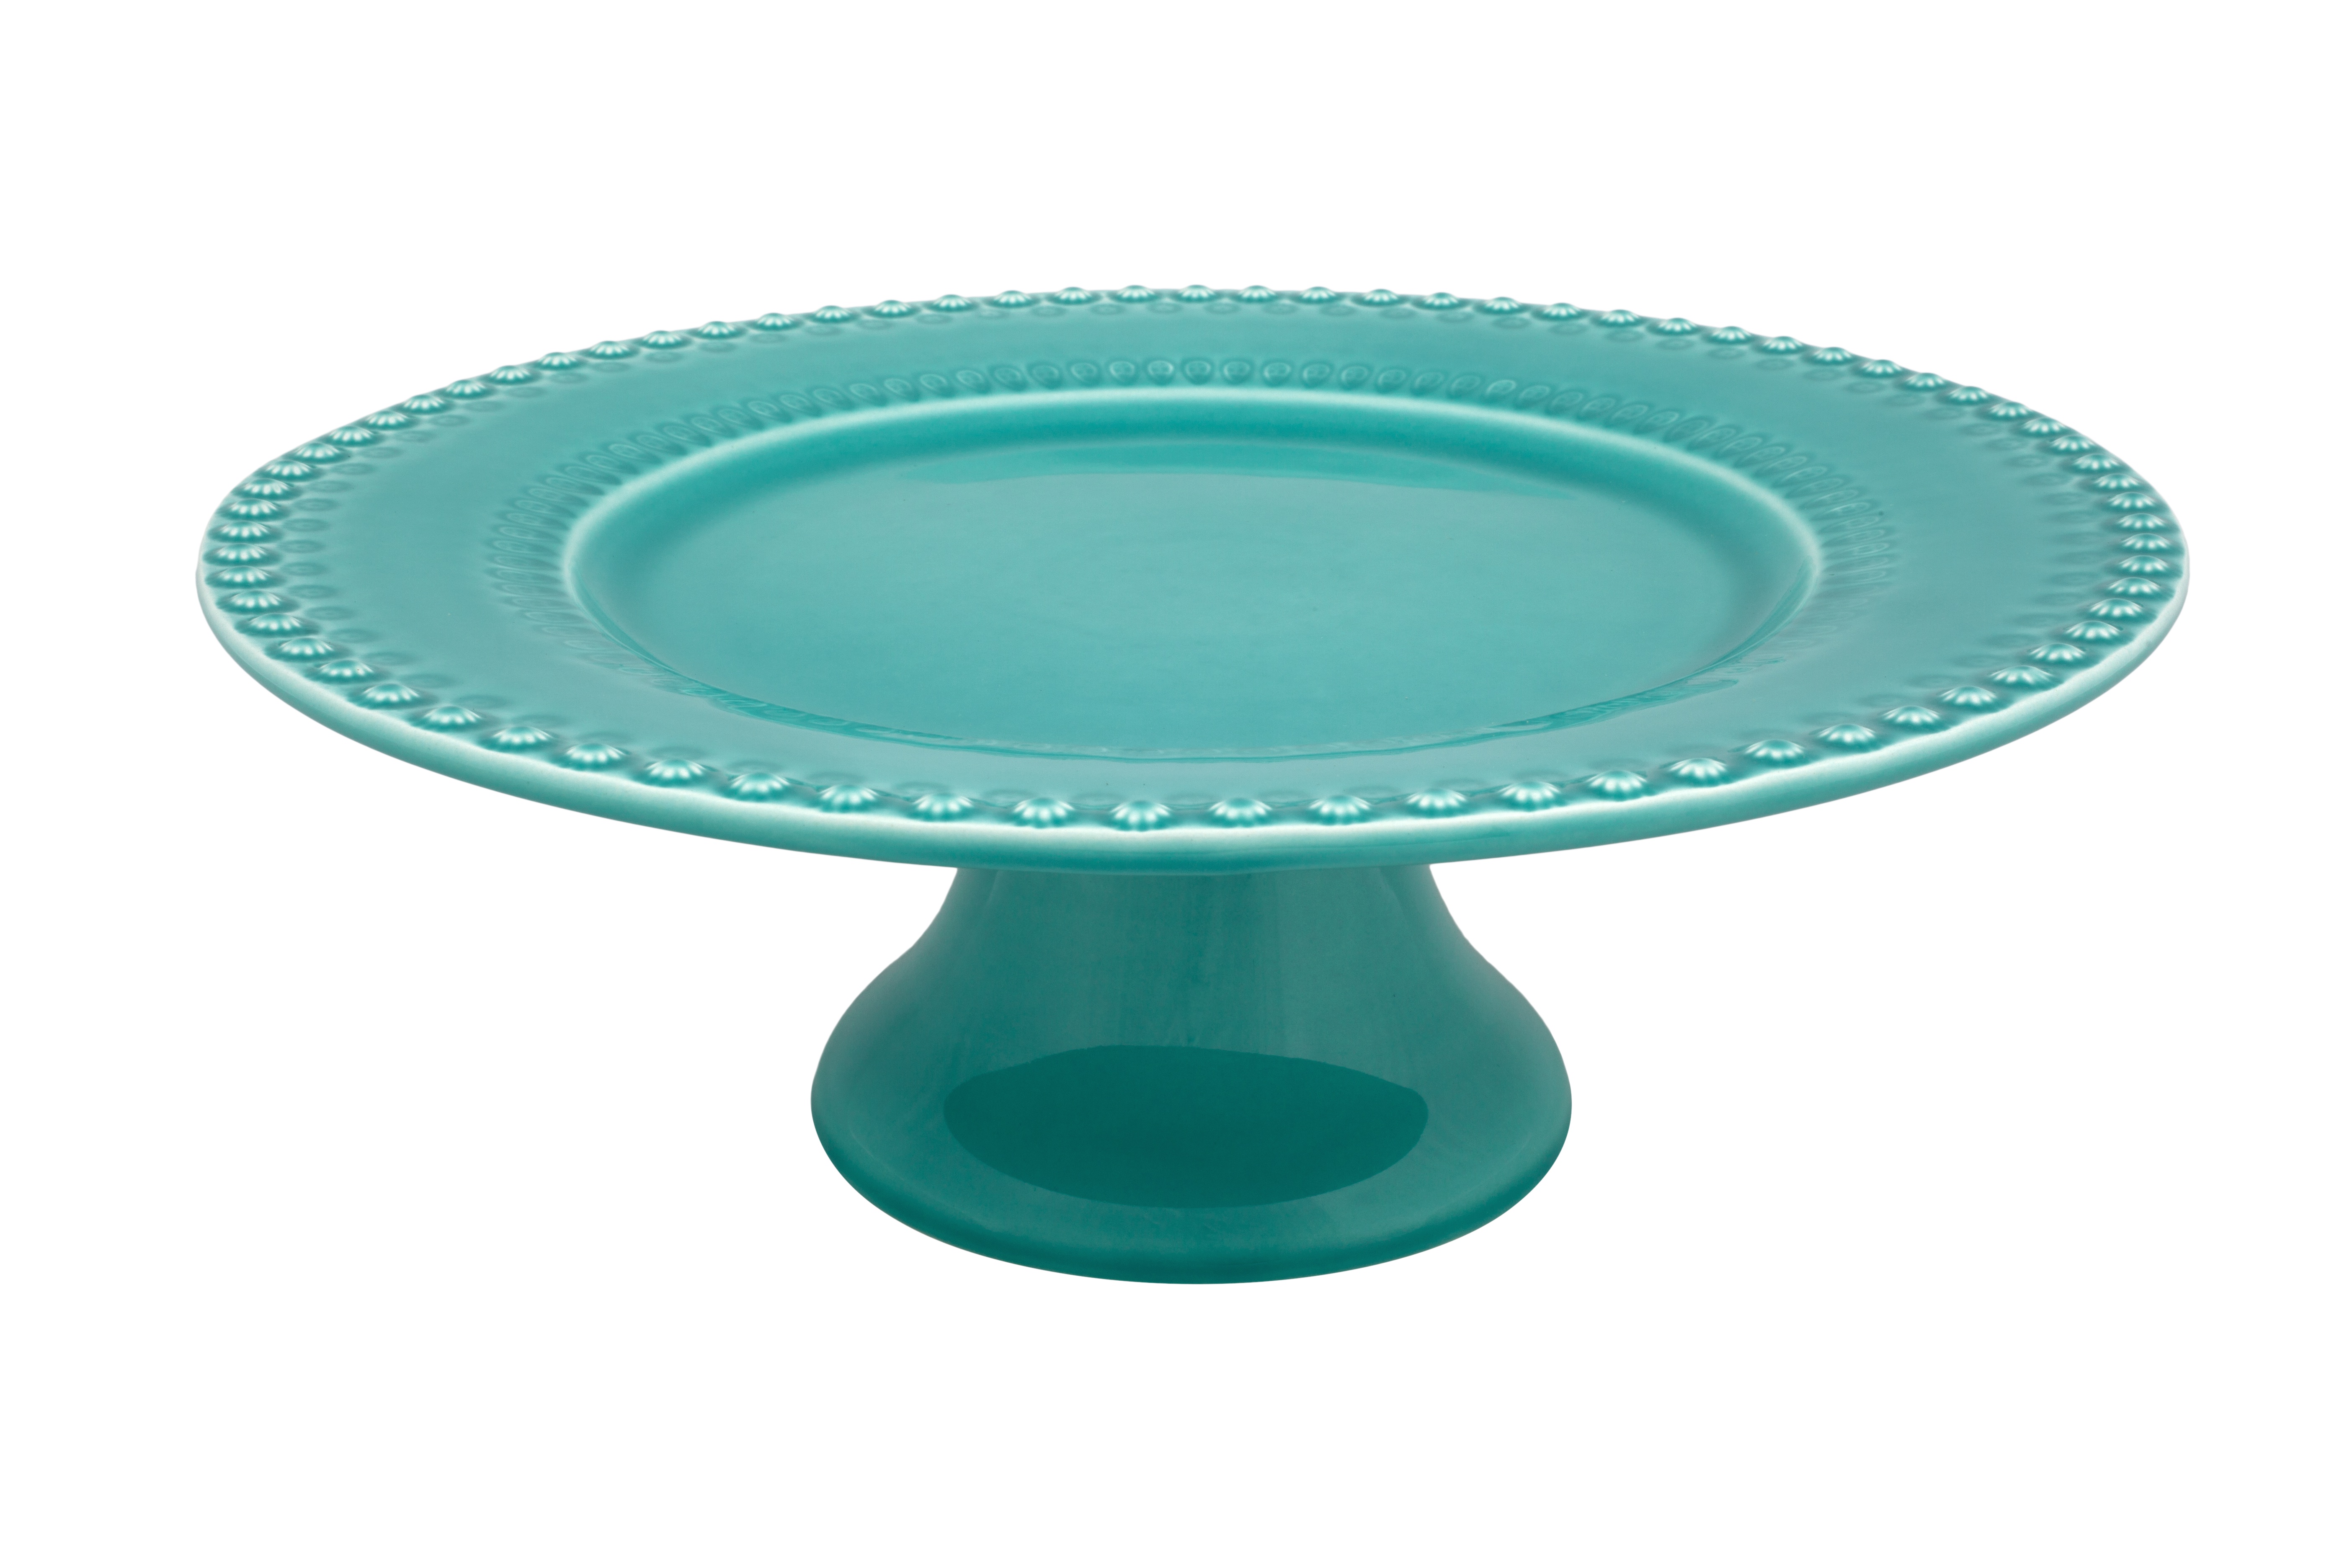 Large Cake Stand